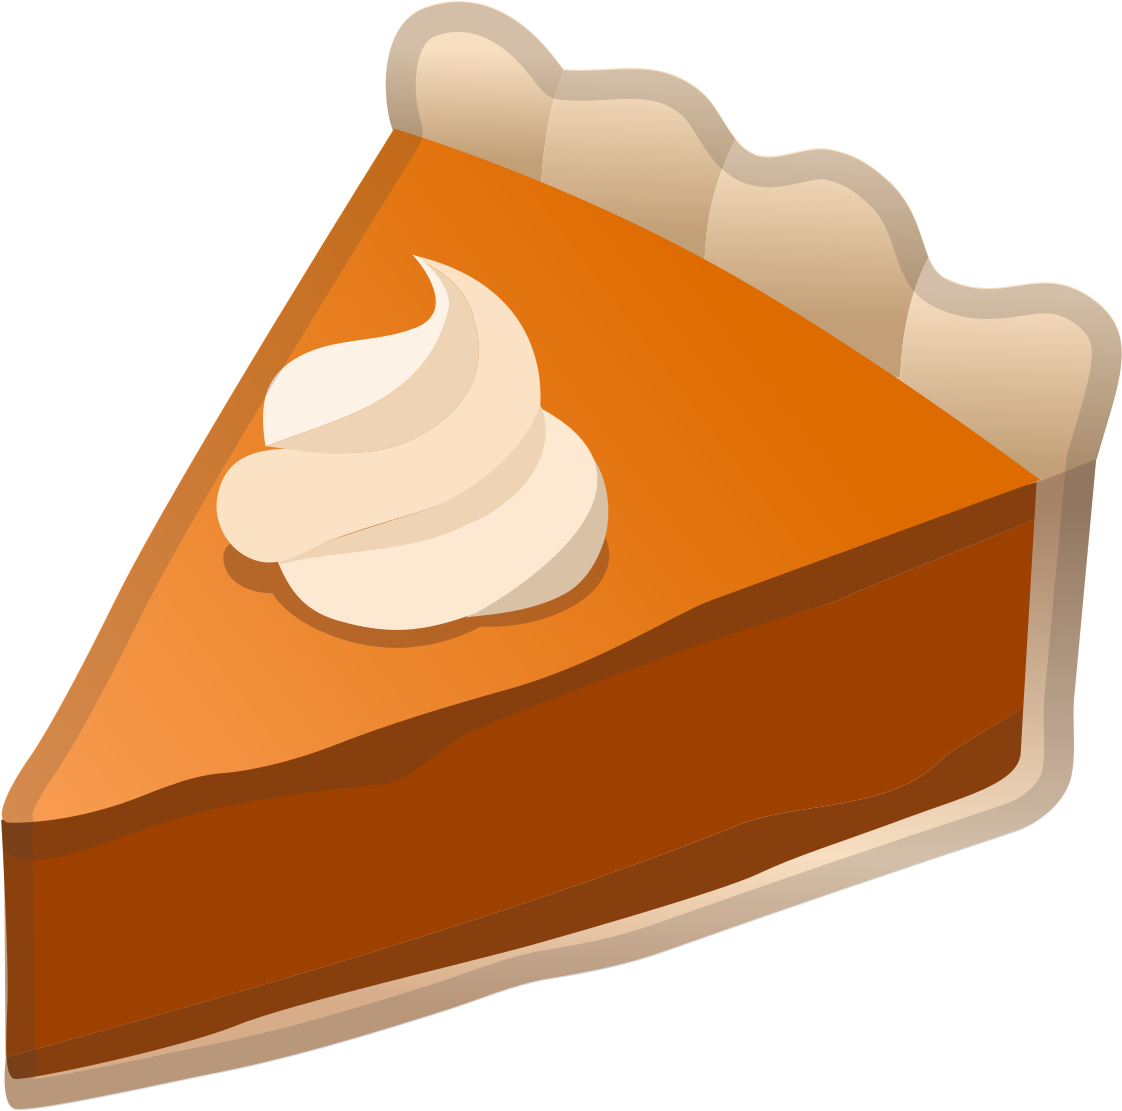 Download PNG image - Pie PNG Photos 